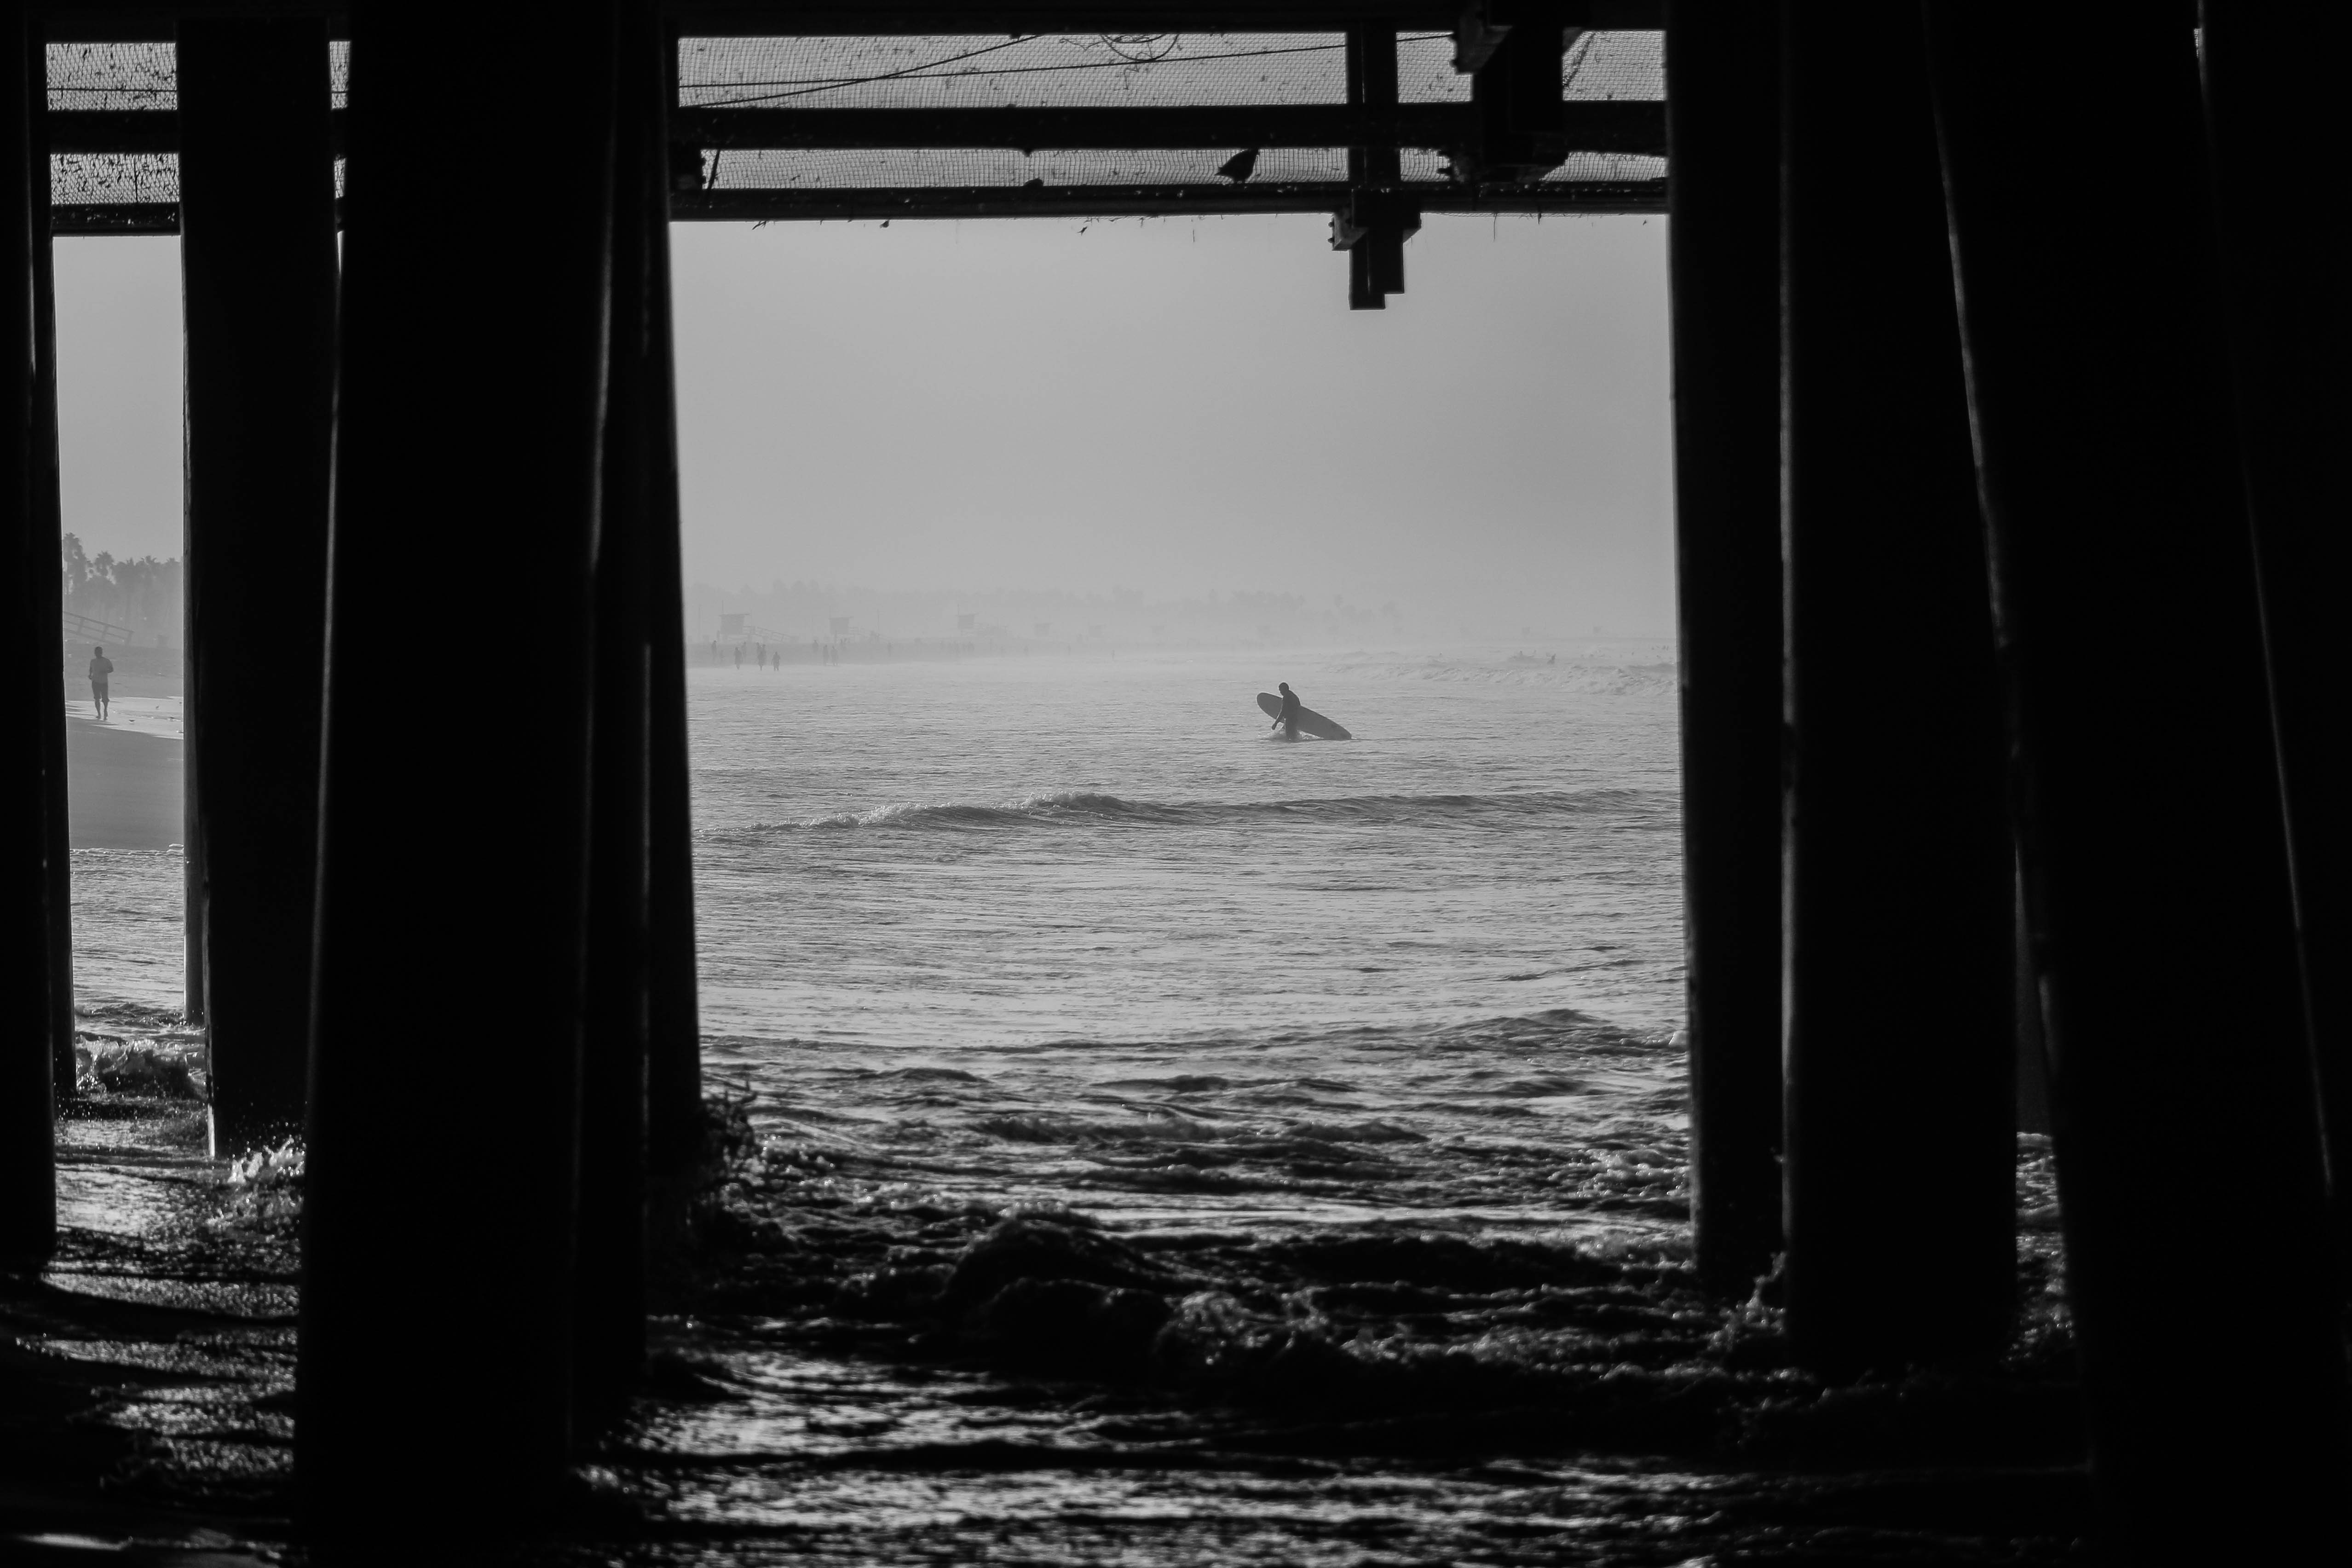 view from under the dock showing surfer in grayscale photography